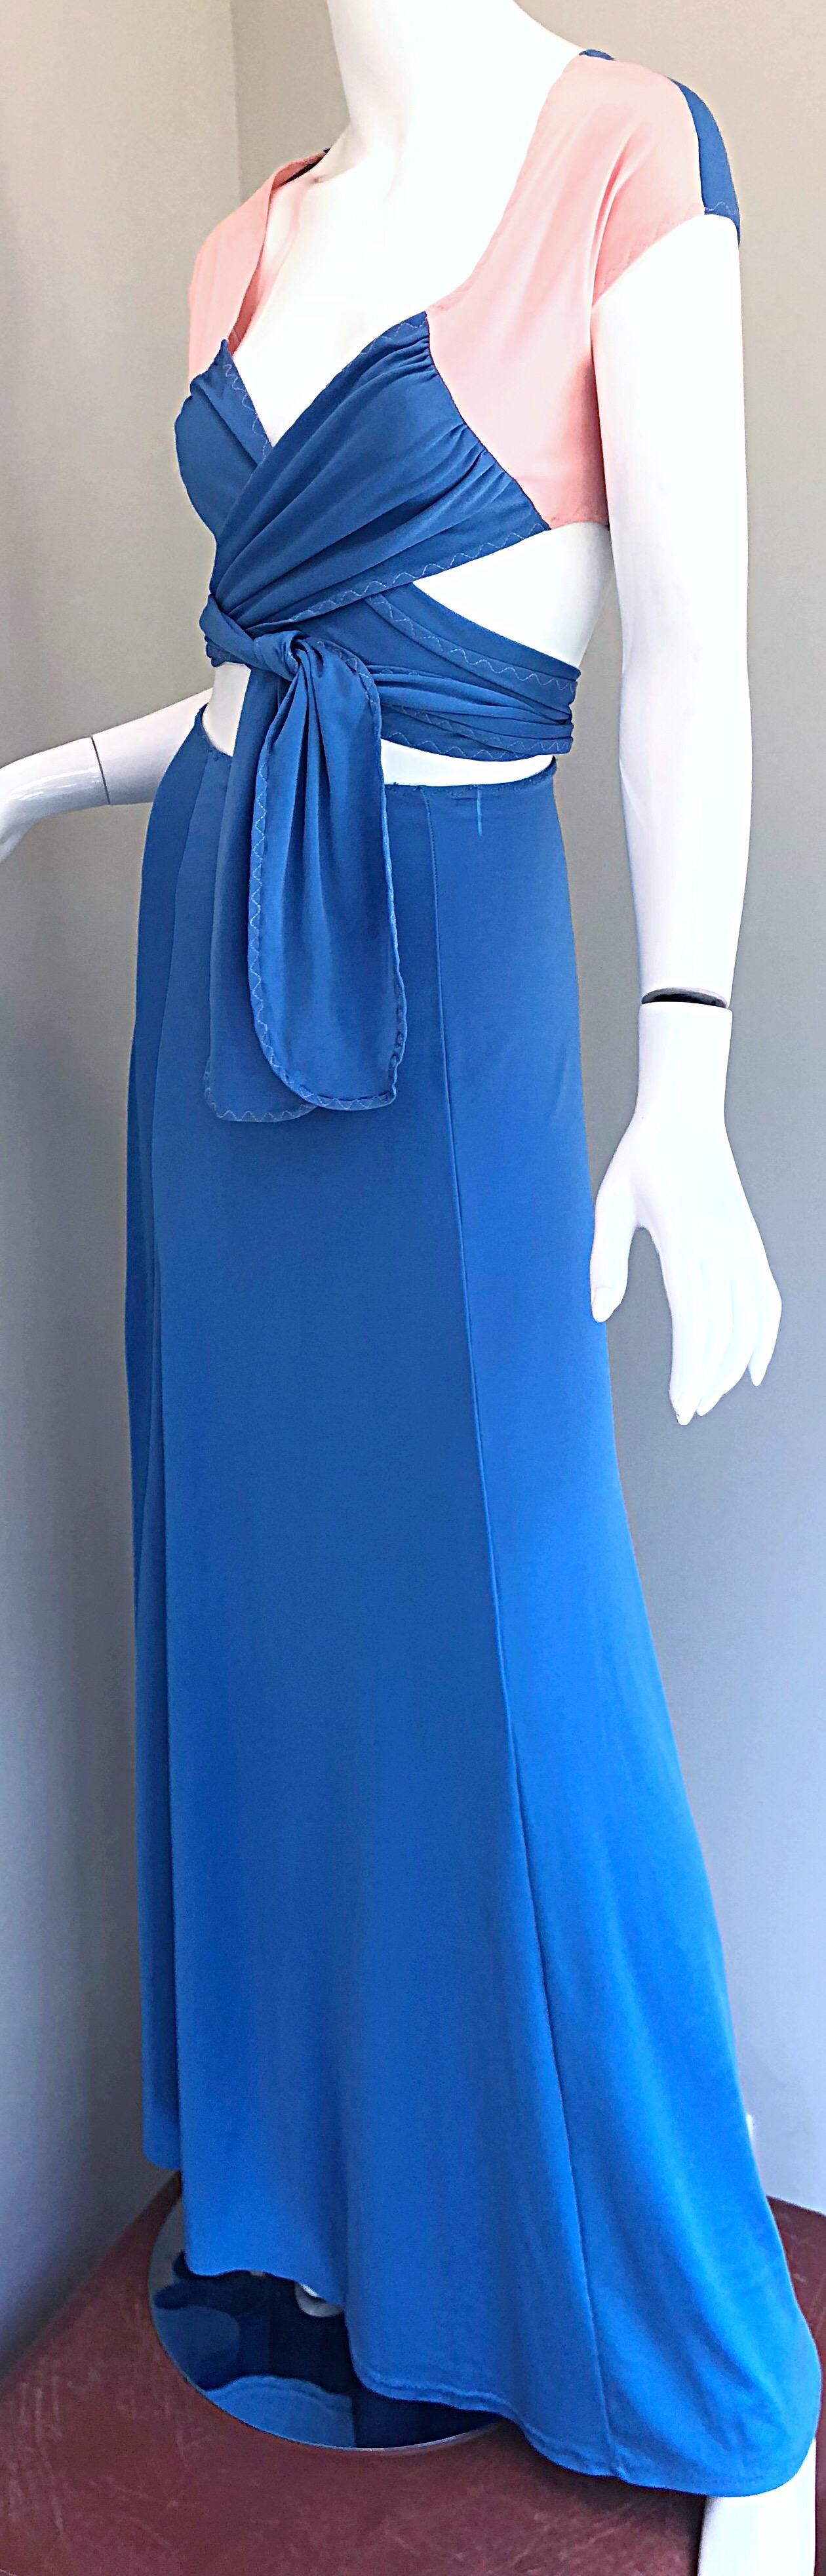 1970s M. Bassel Blue + Light Pink Vintage Wrap Crop Top Shirt and Maxi Skirt For Sale 4